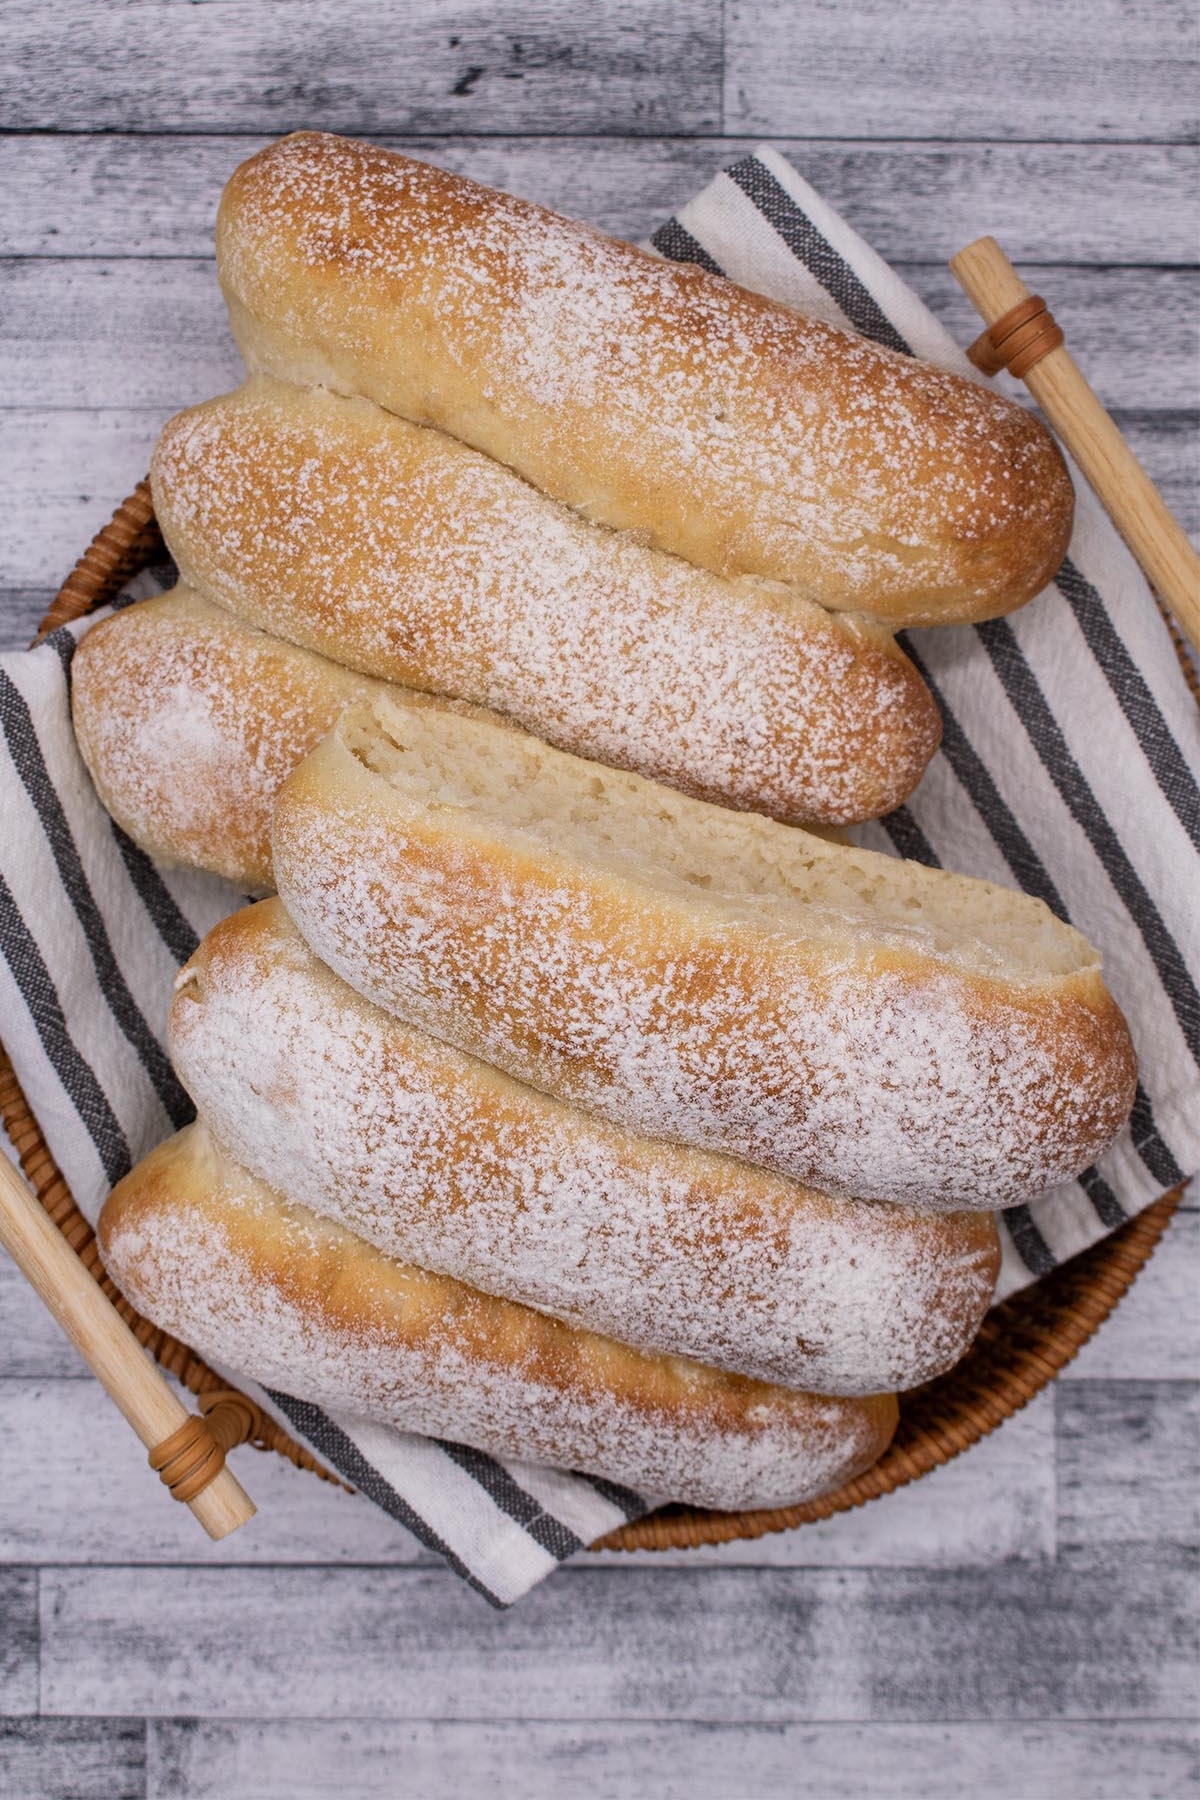 6 White finger rolls in a bread basket with a black and white towel